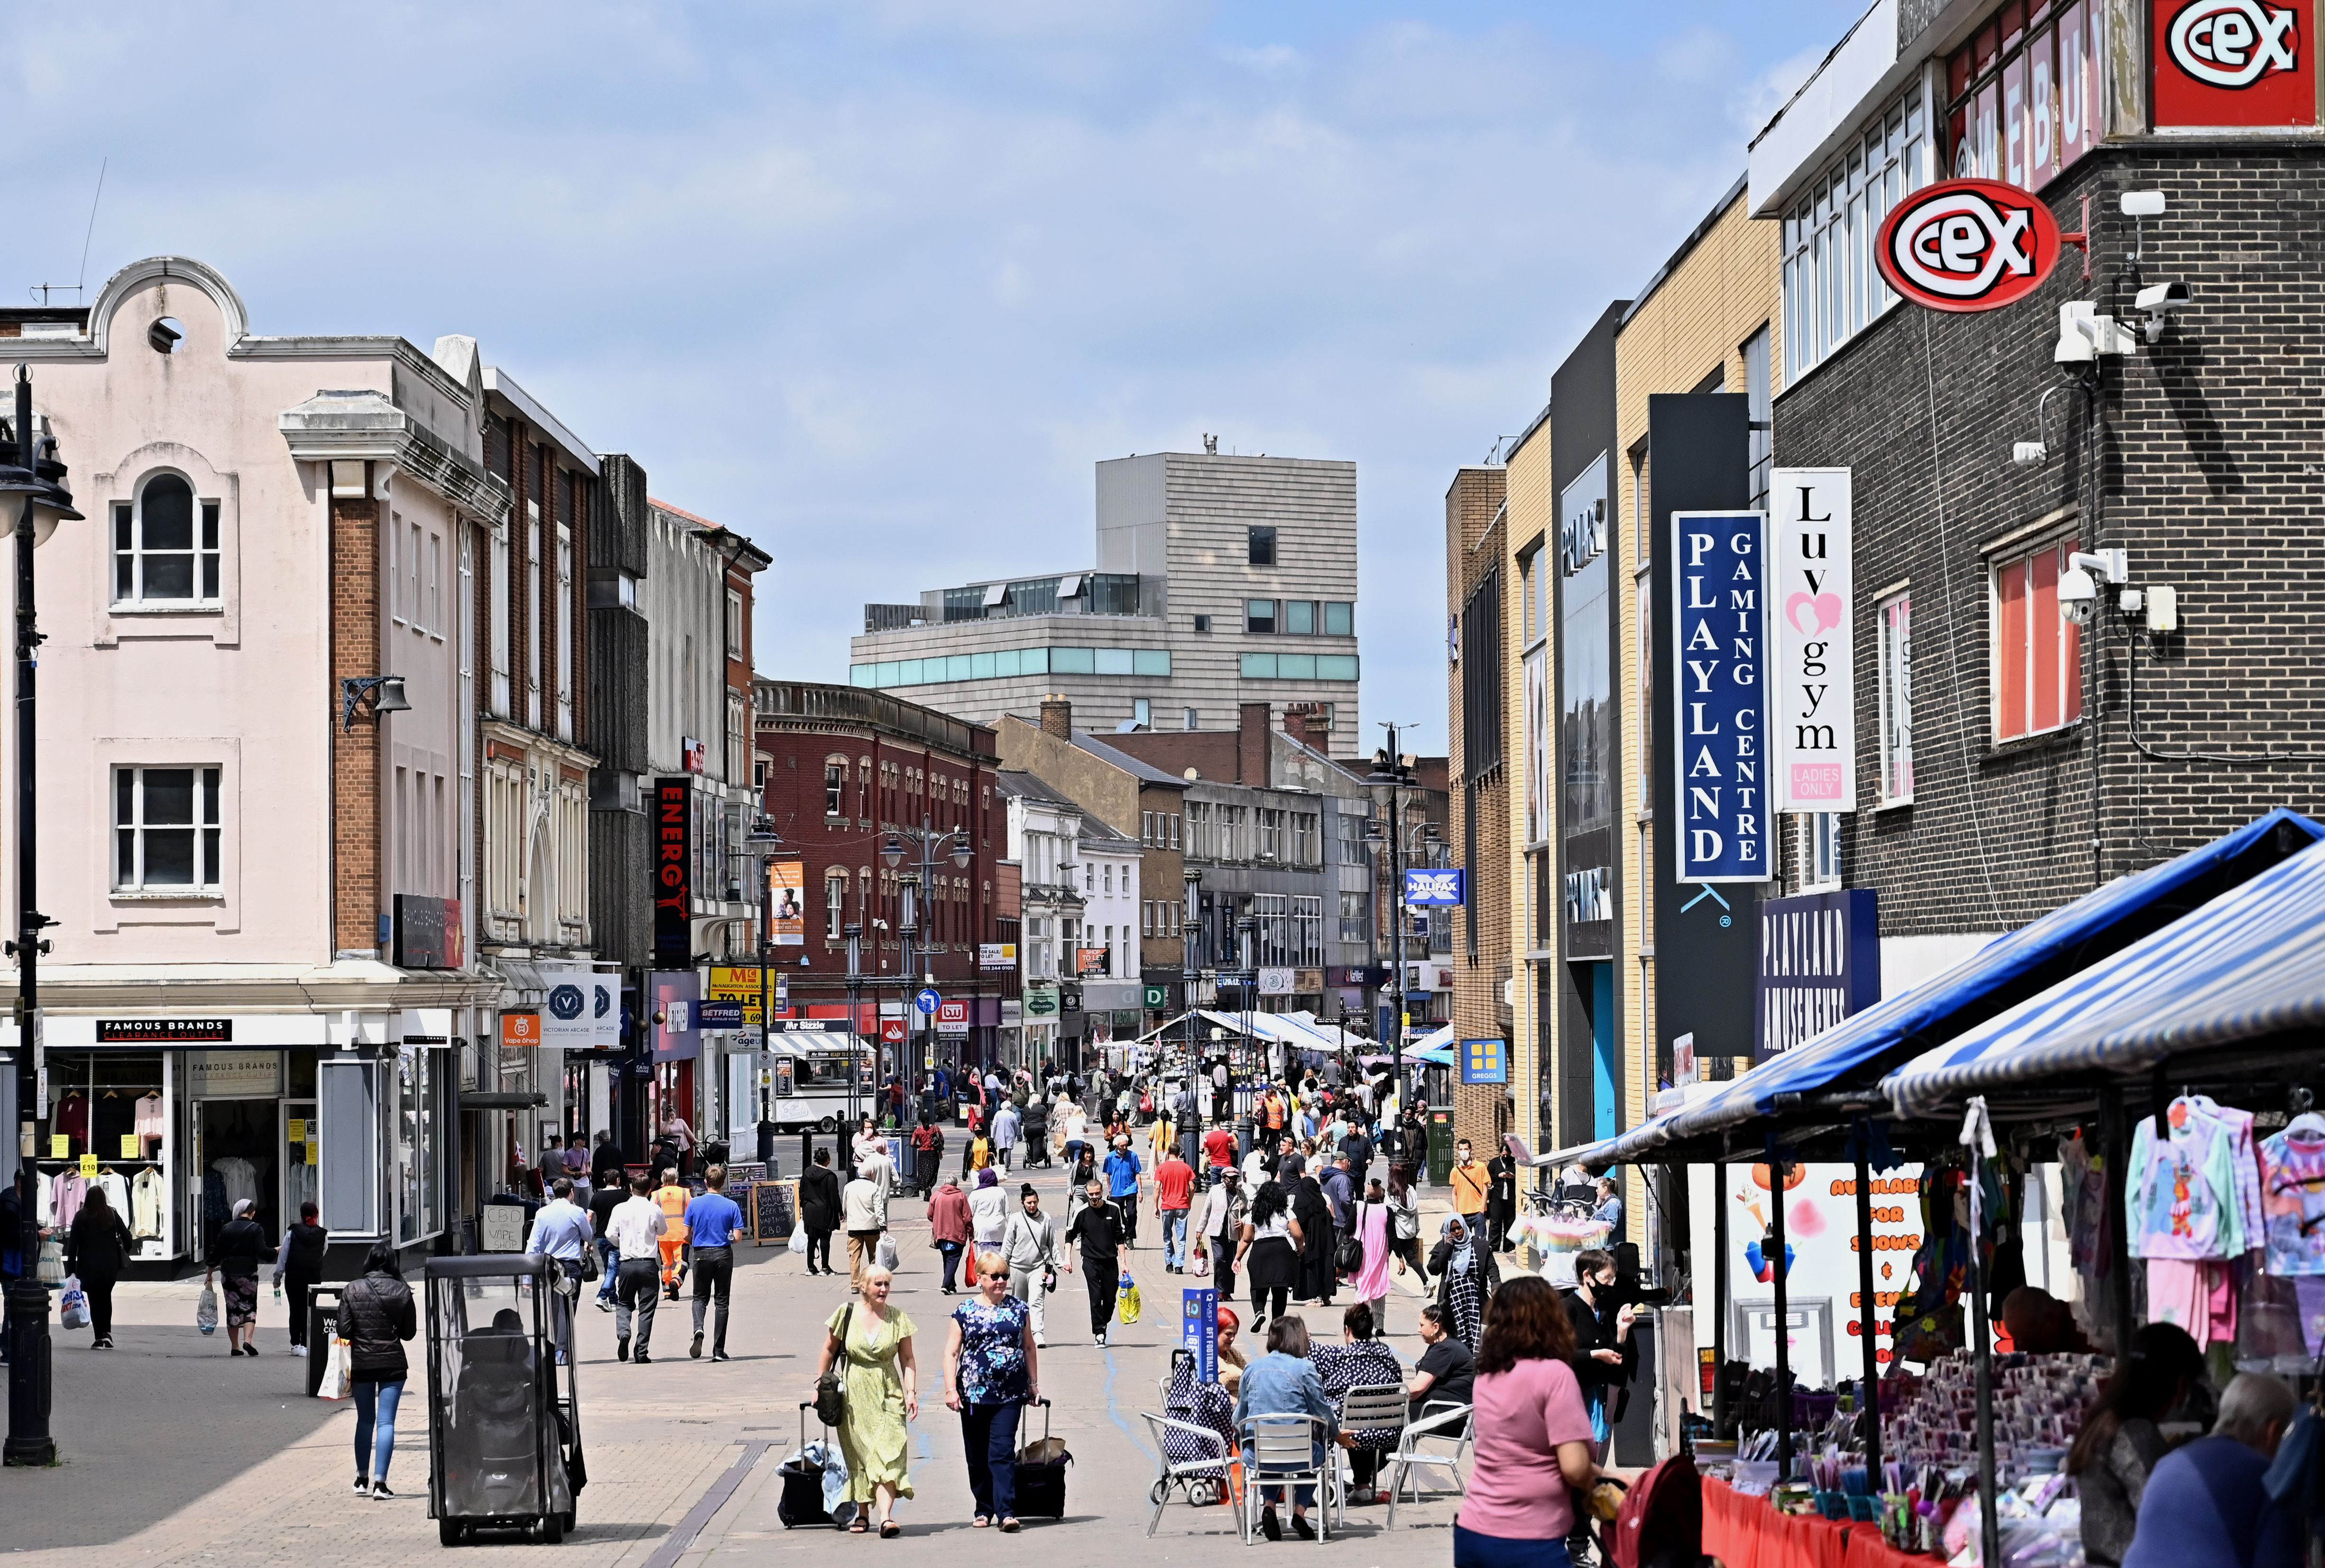 Walsall town centre